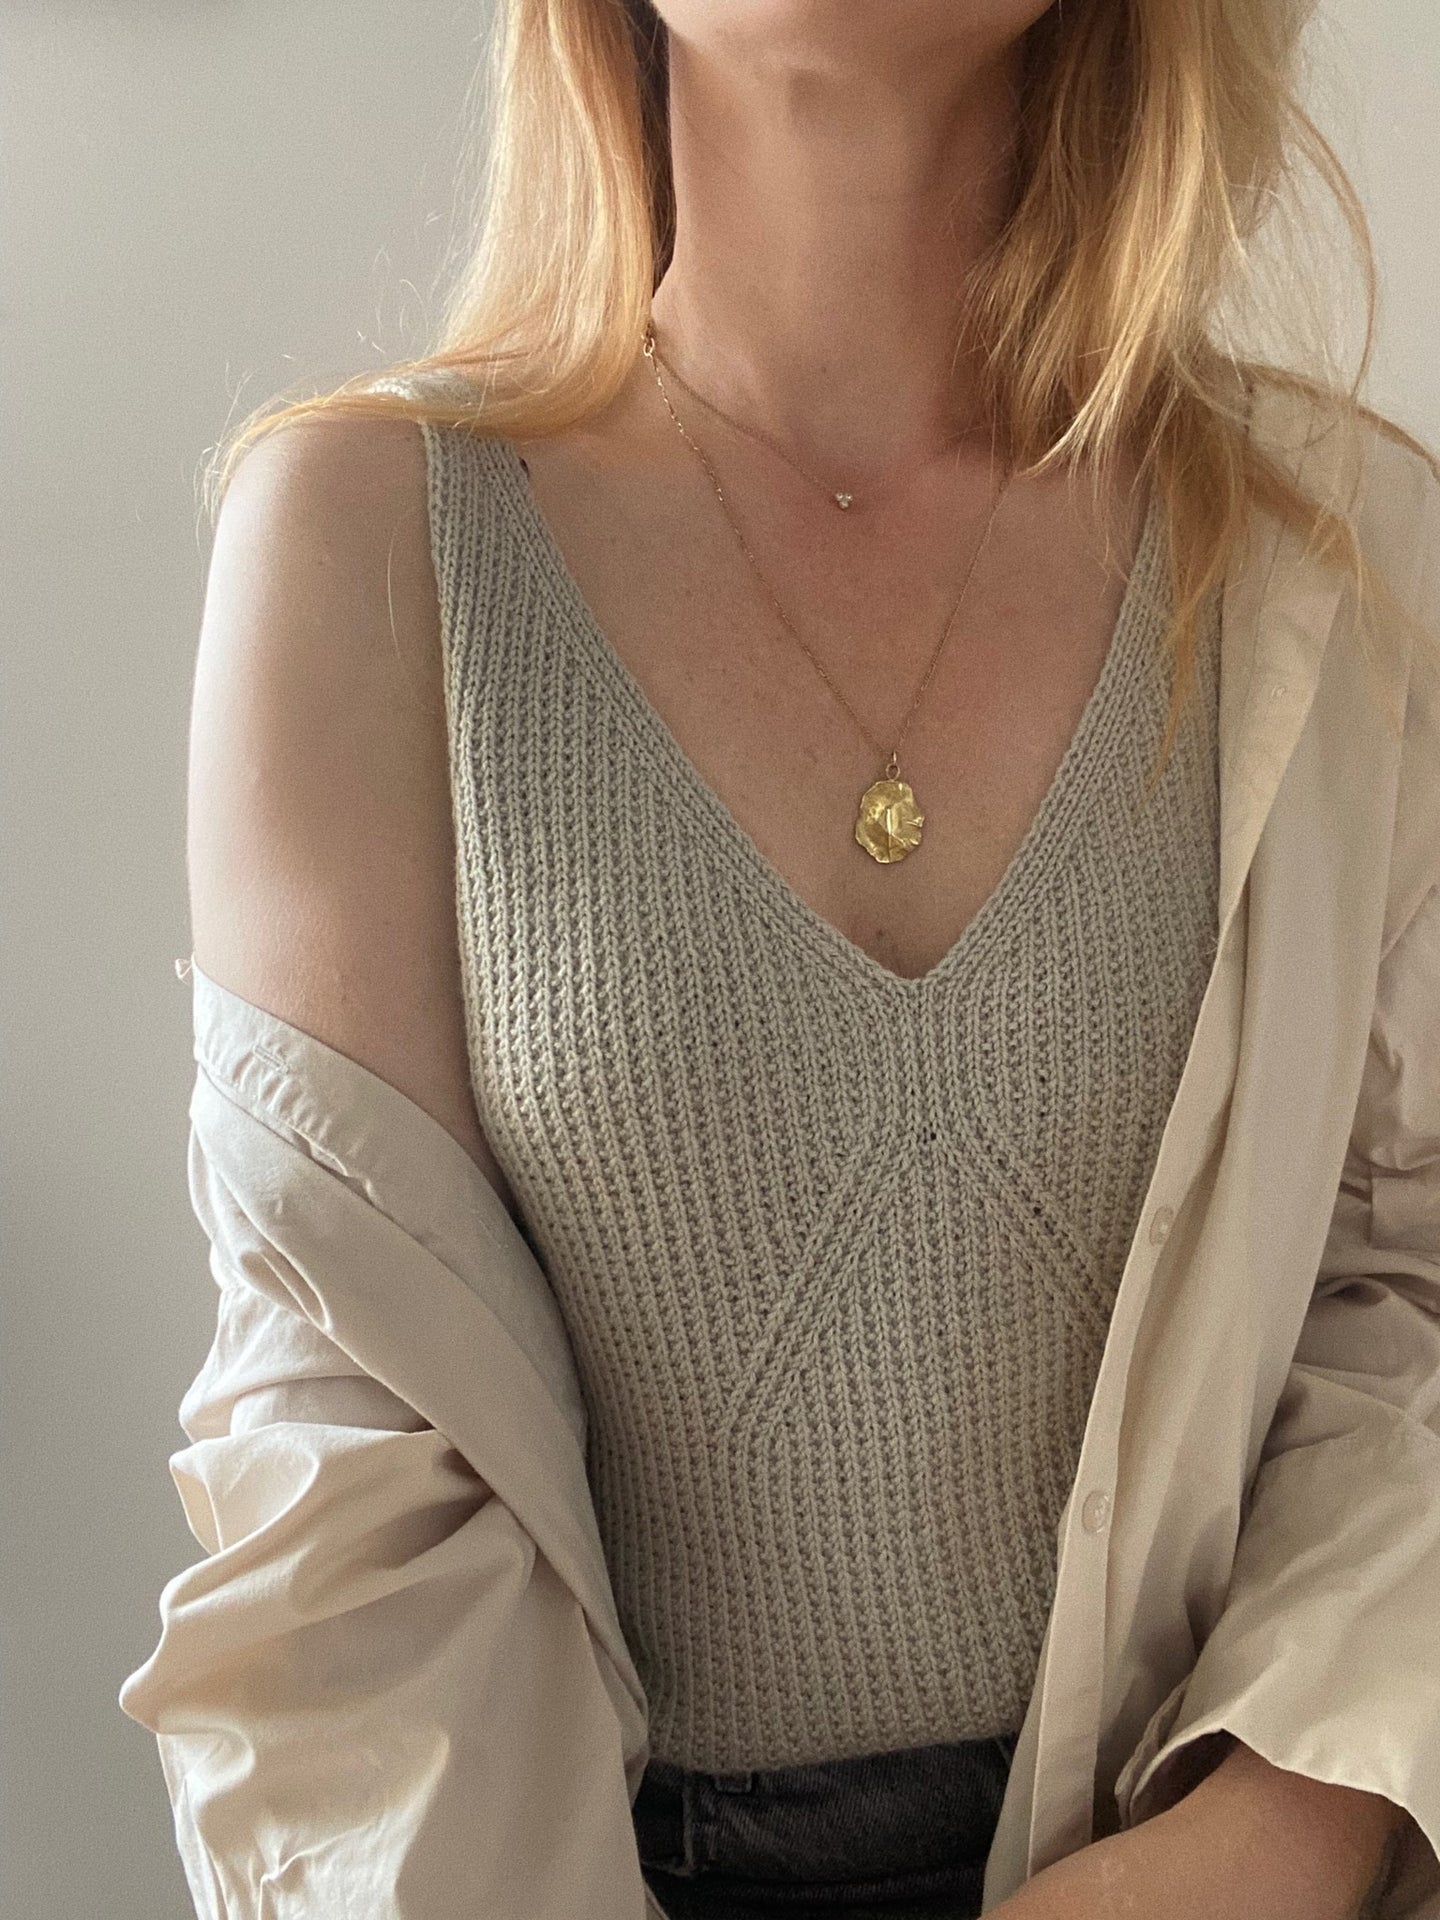 Camisole No. 7 - Knitting Pattern in English – • MY FAVOURITE